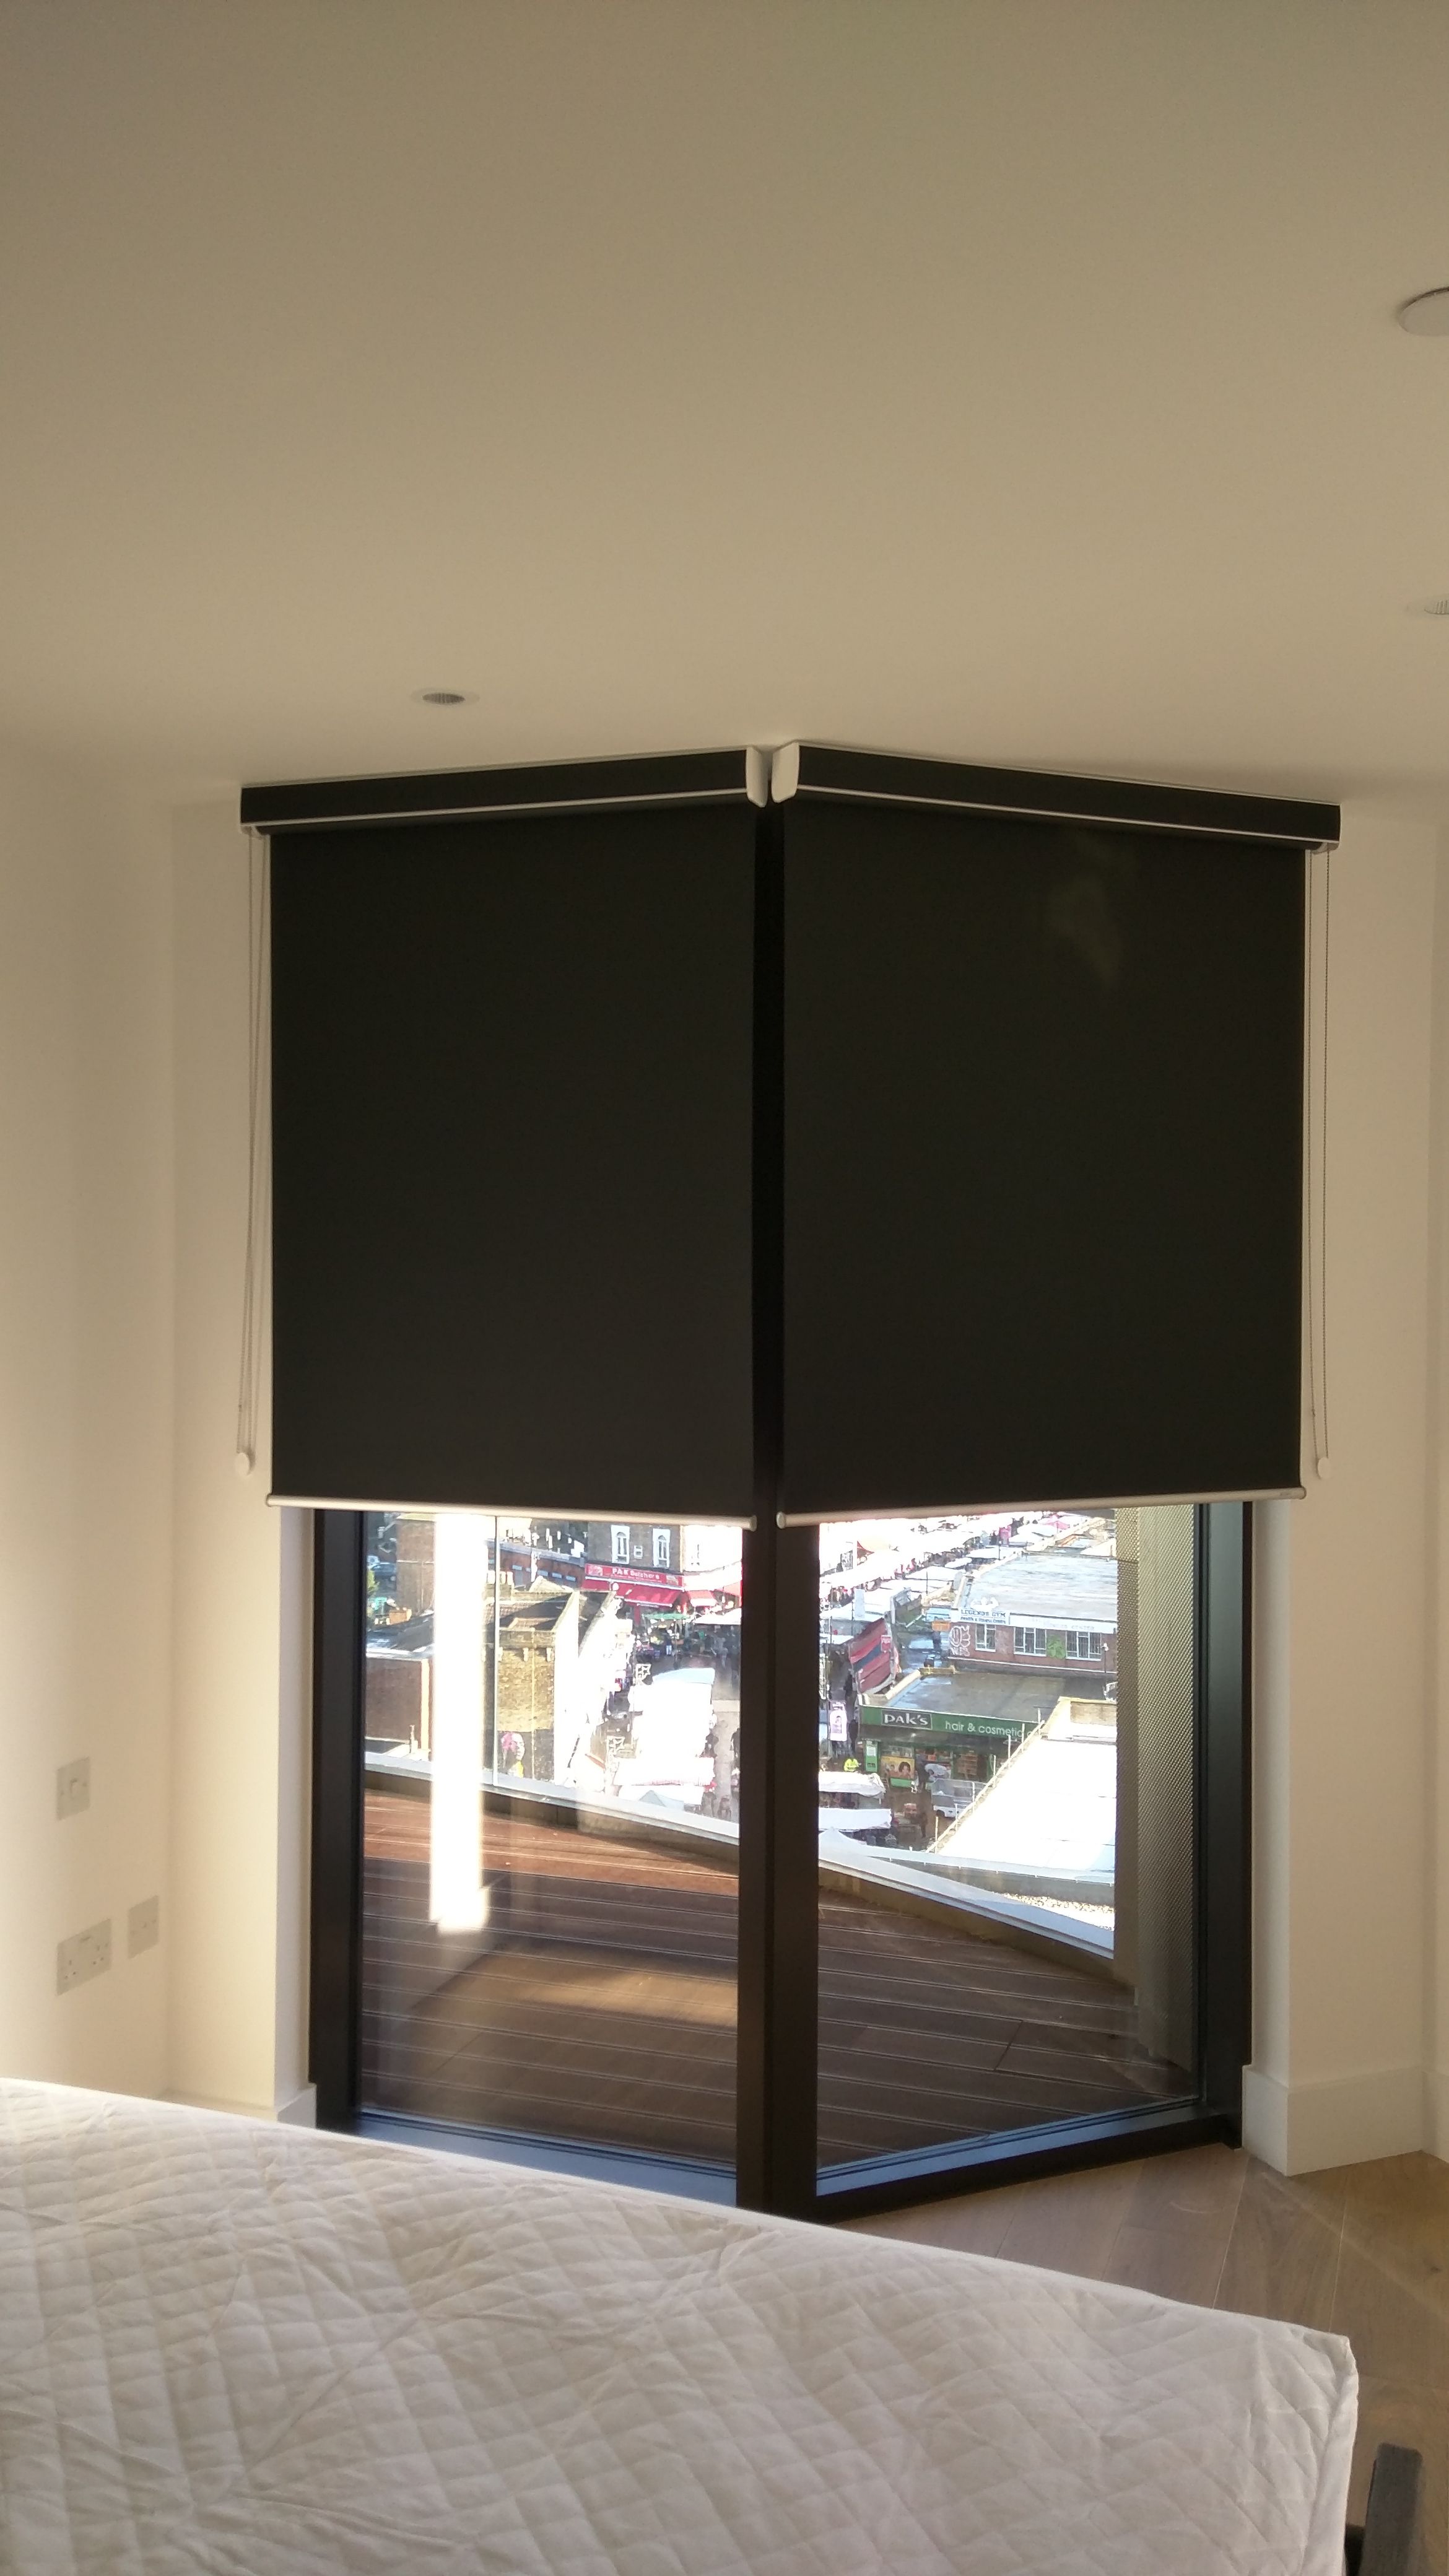 The Many Benefits and Uses of Blackout Blinds